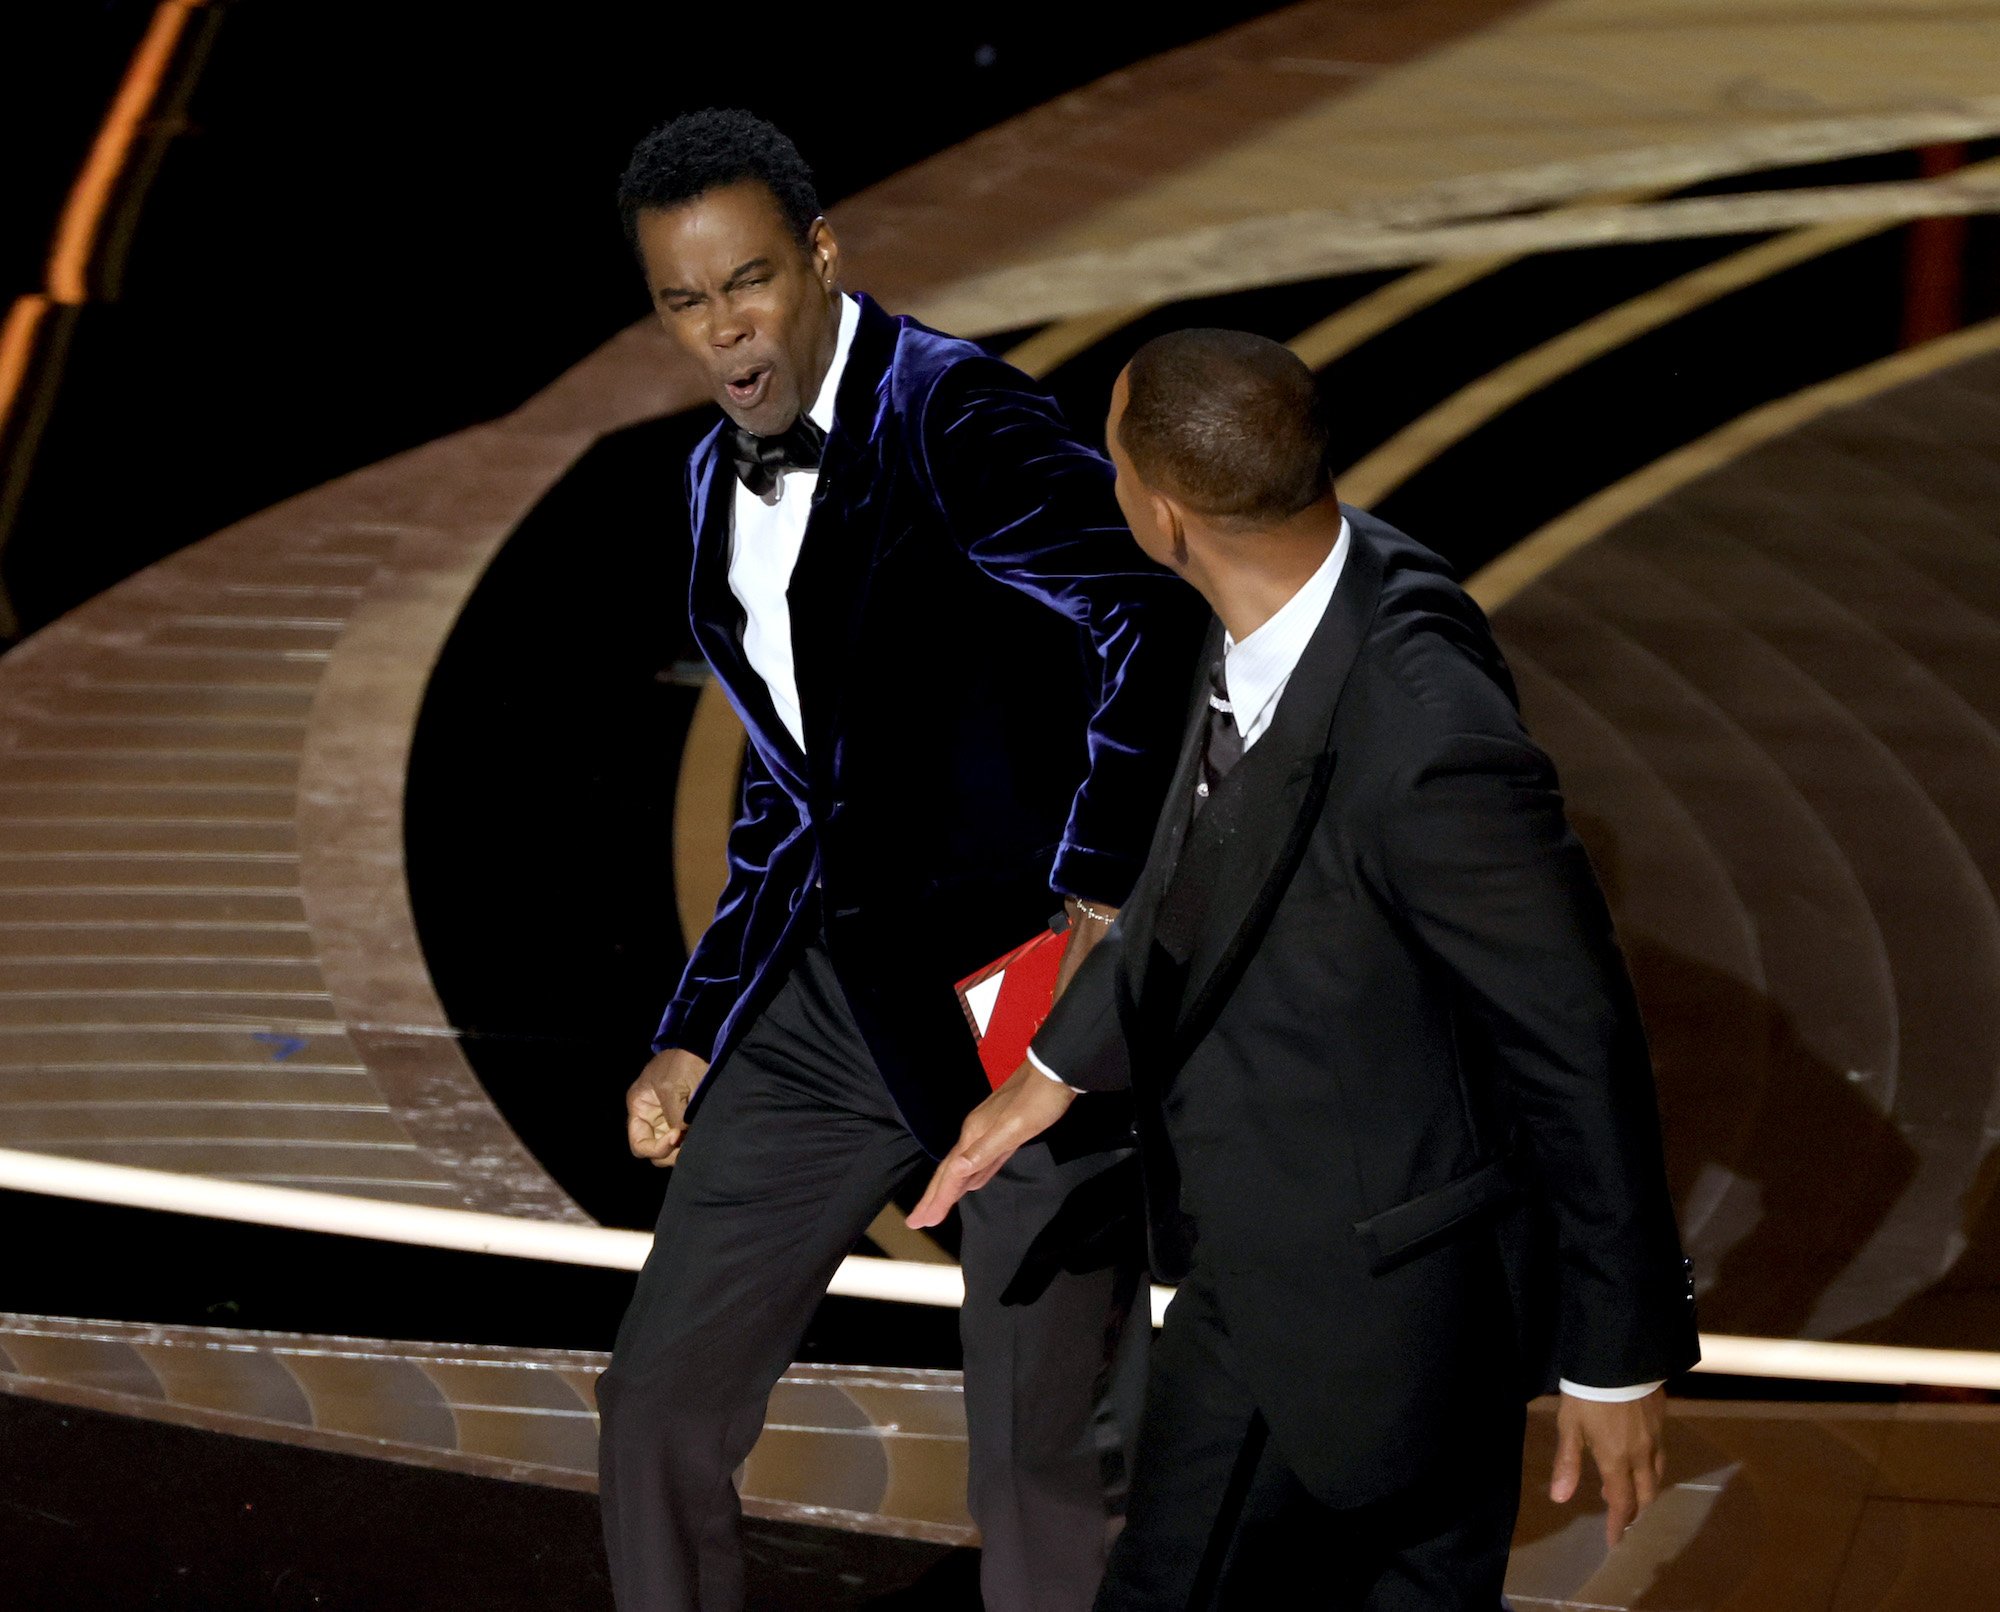 At the Oscars 2022 Will Smith is seen slapping Chris Rock on stage.